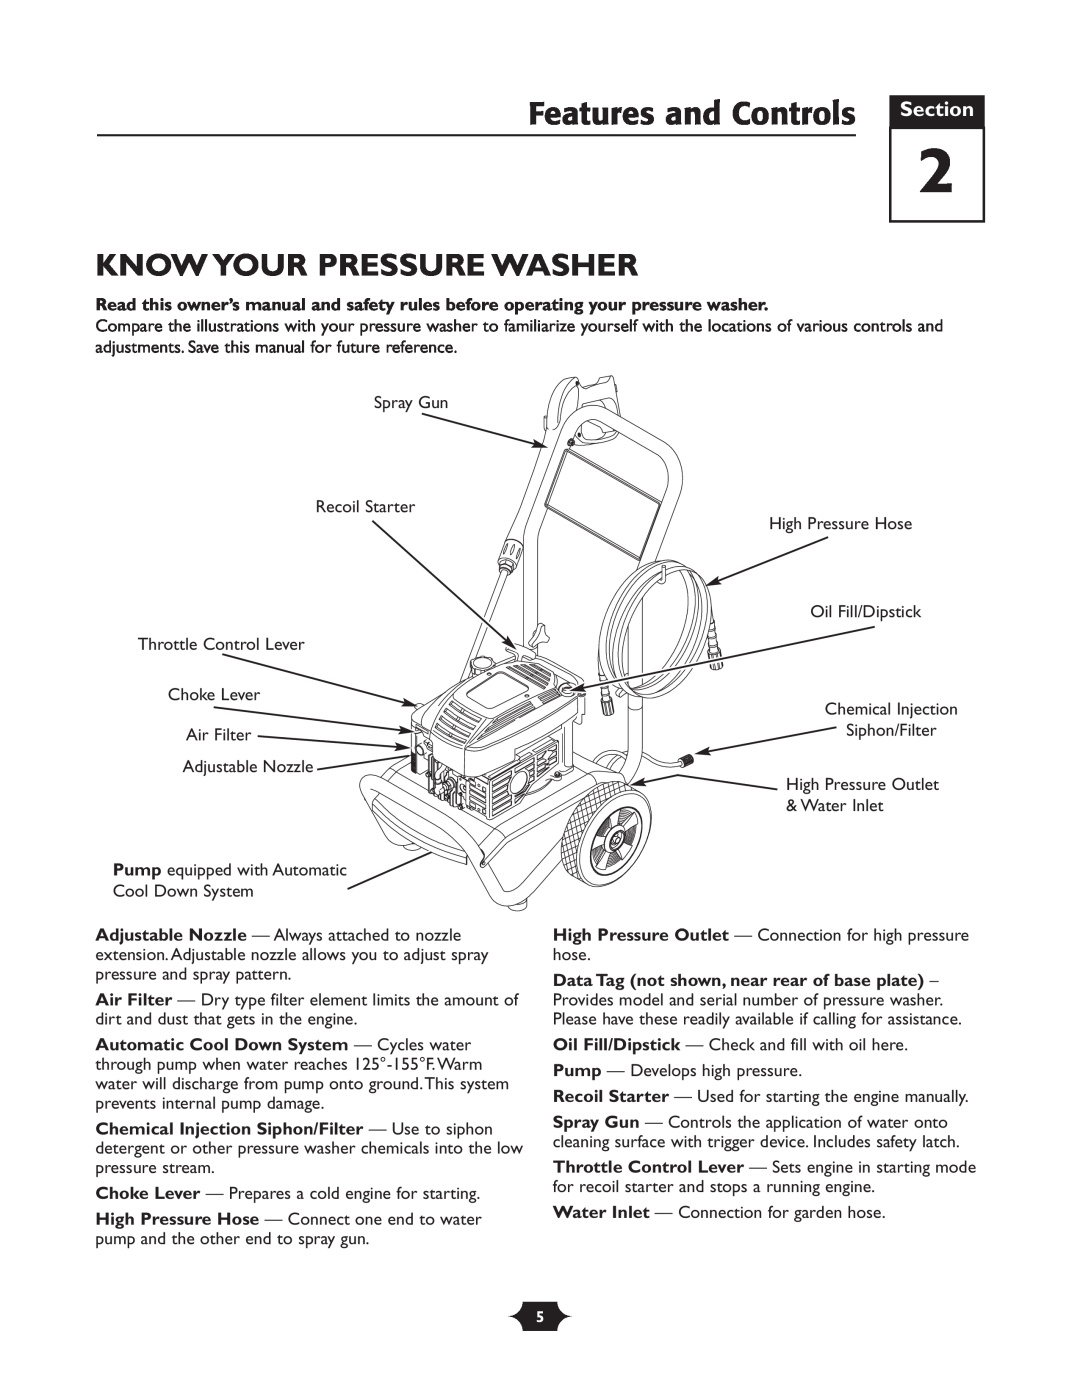 Troy-Bilt 20207 manual Features and Controls Section, Know Your Pressure Washer 